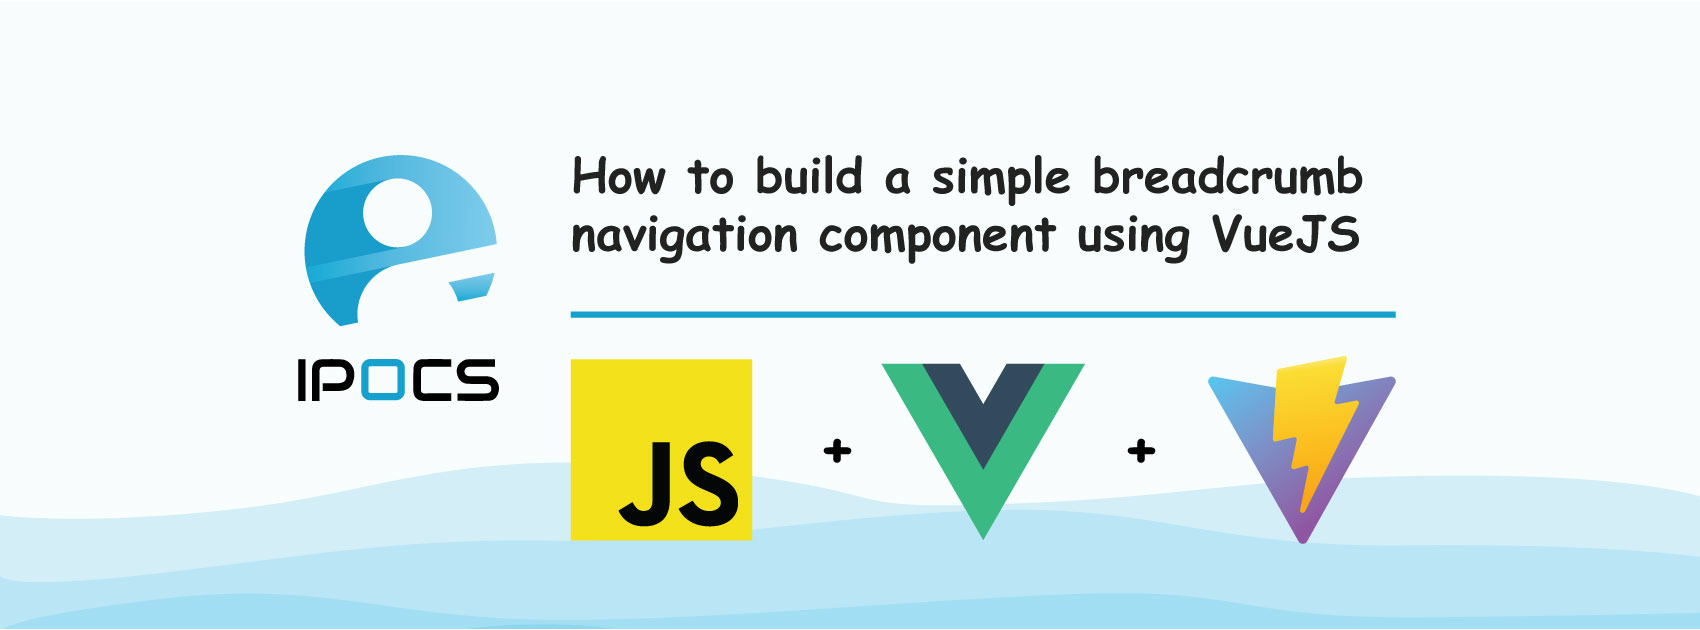 How to build a simple breadcrumb navigation component using VueJS